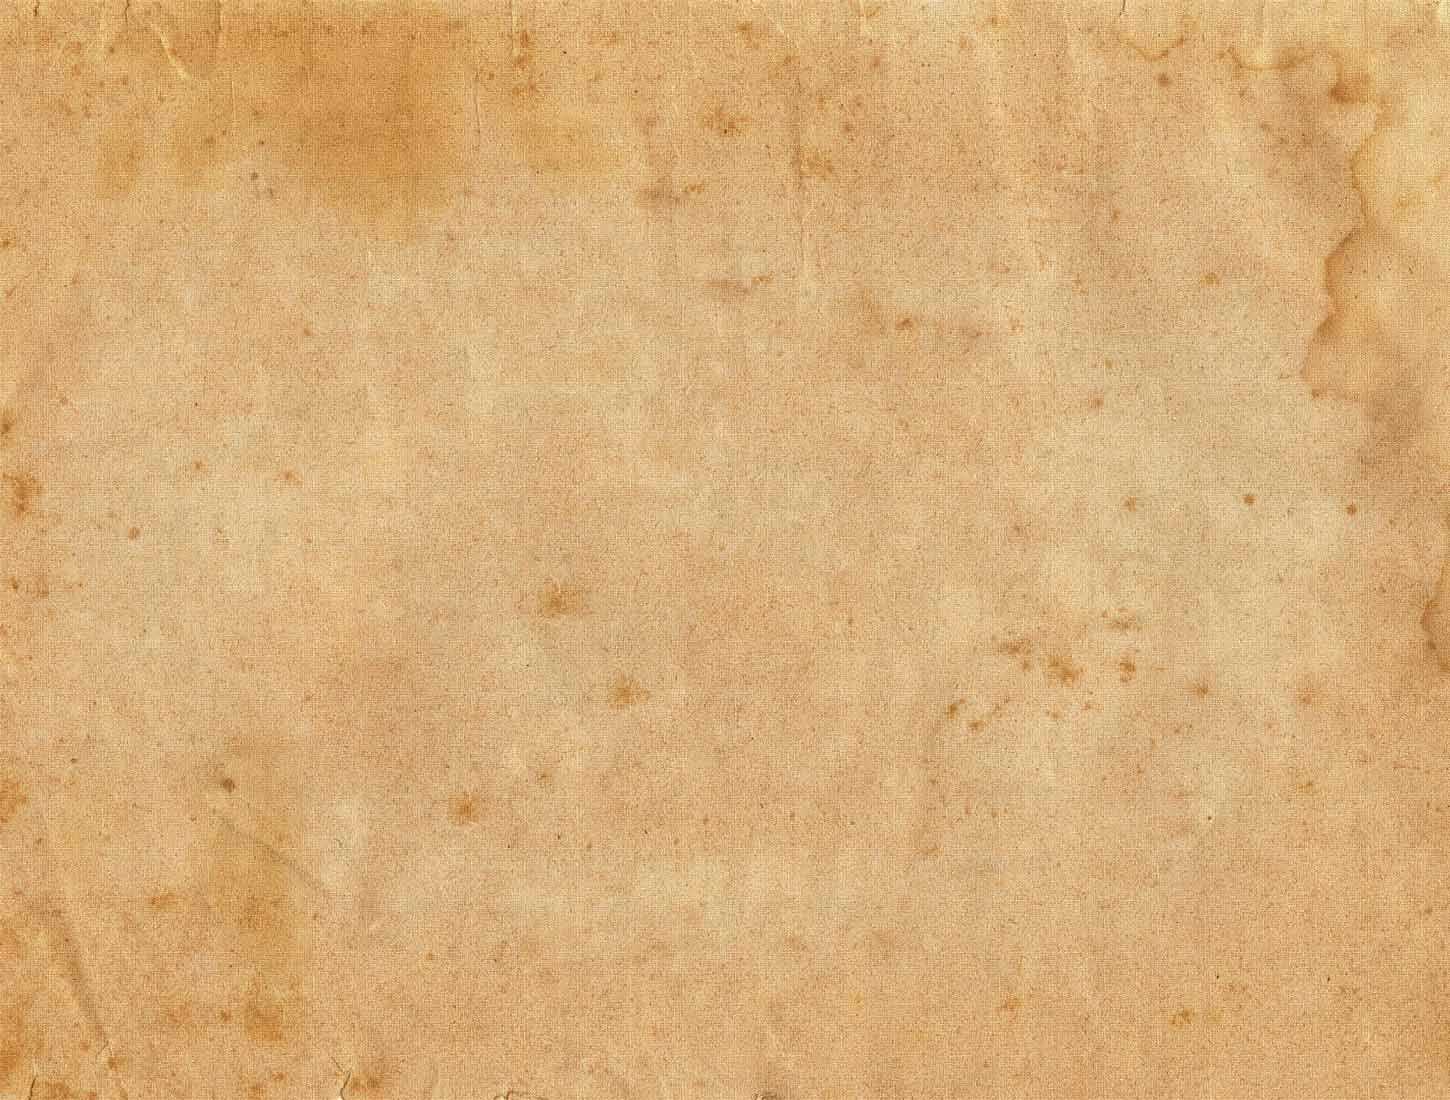 Old Beige Blank Paper Free Ppt Backgrounds For Your Regarding Blank Old Newspaper Template